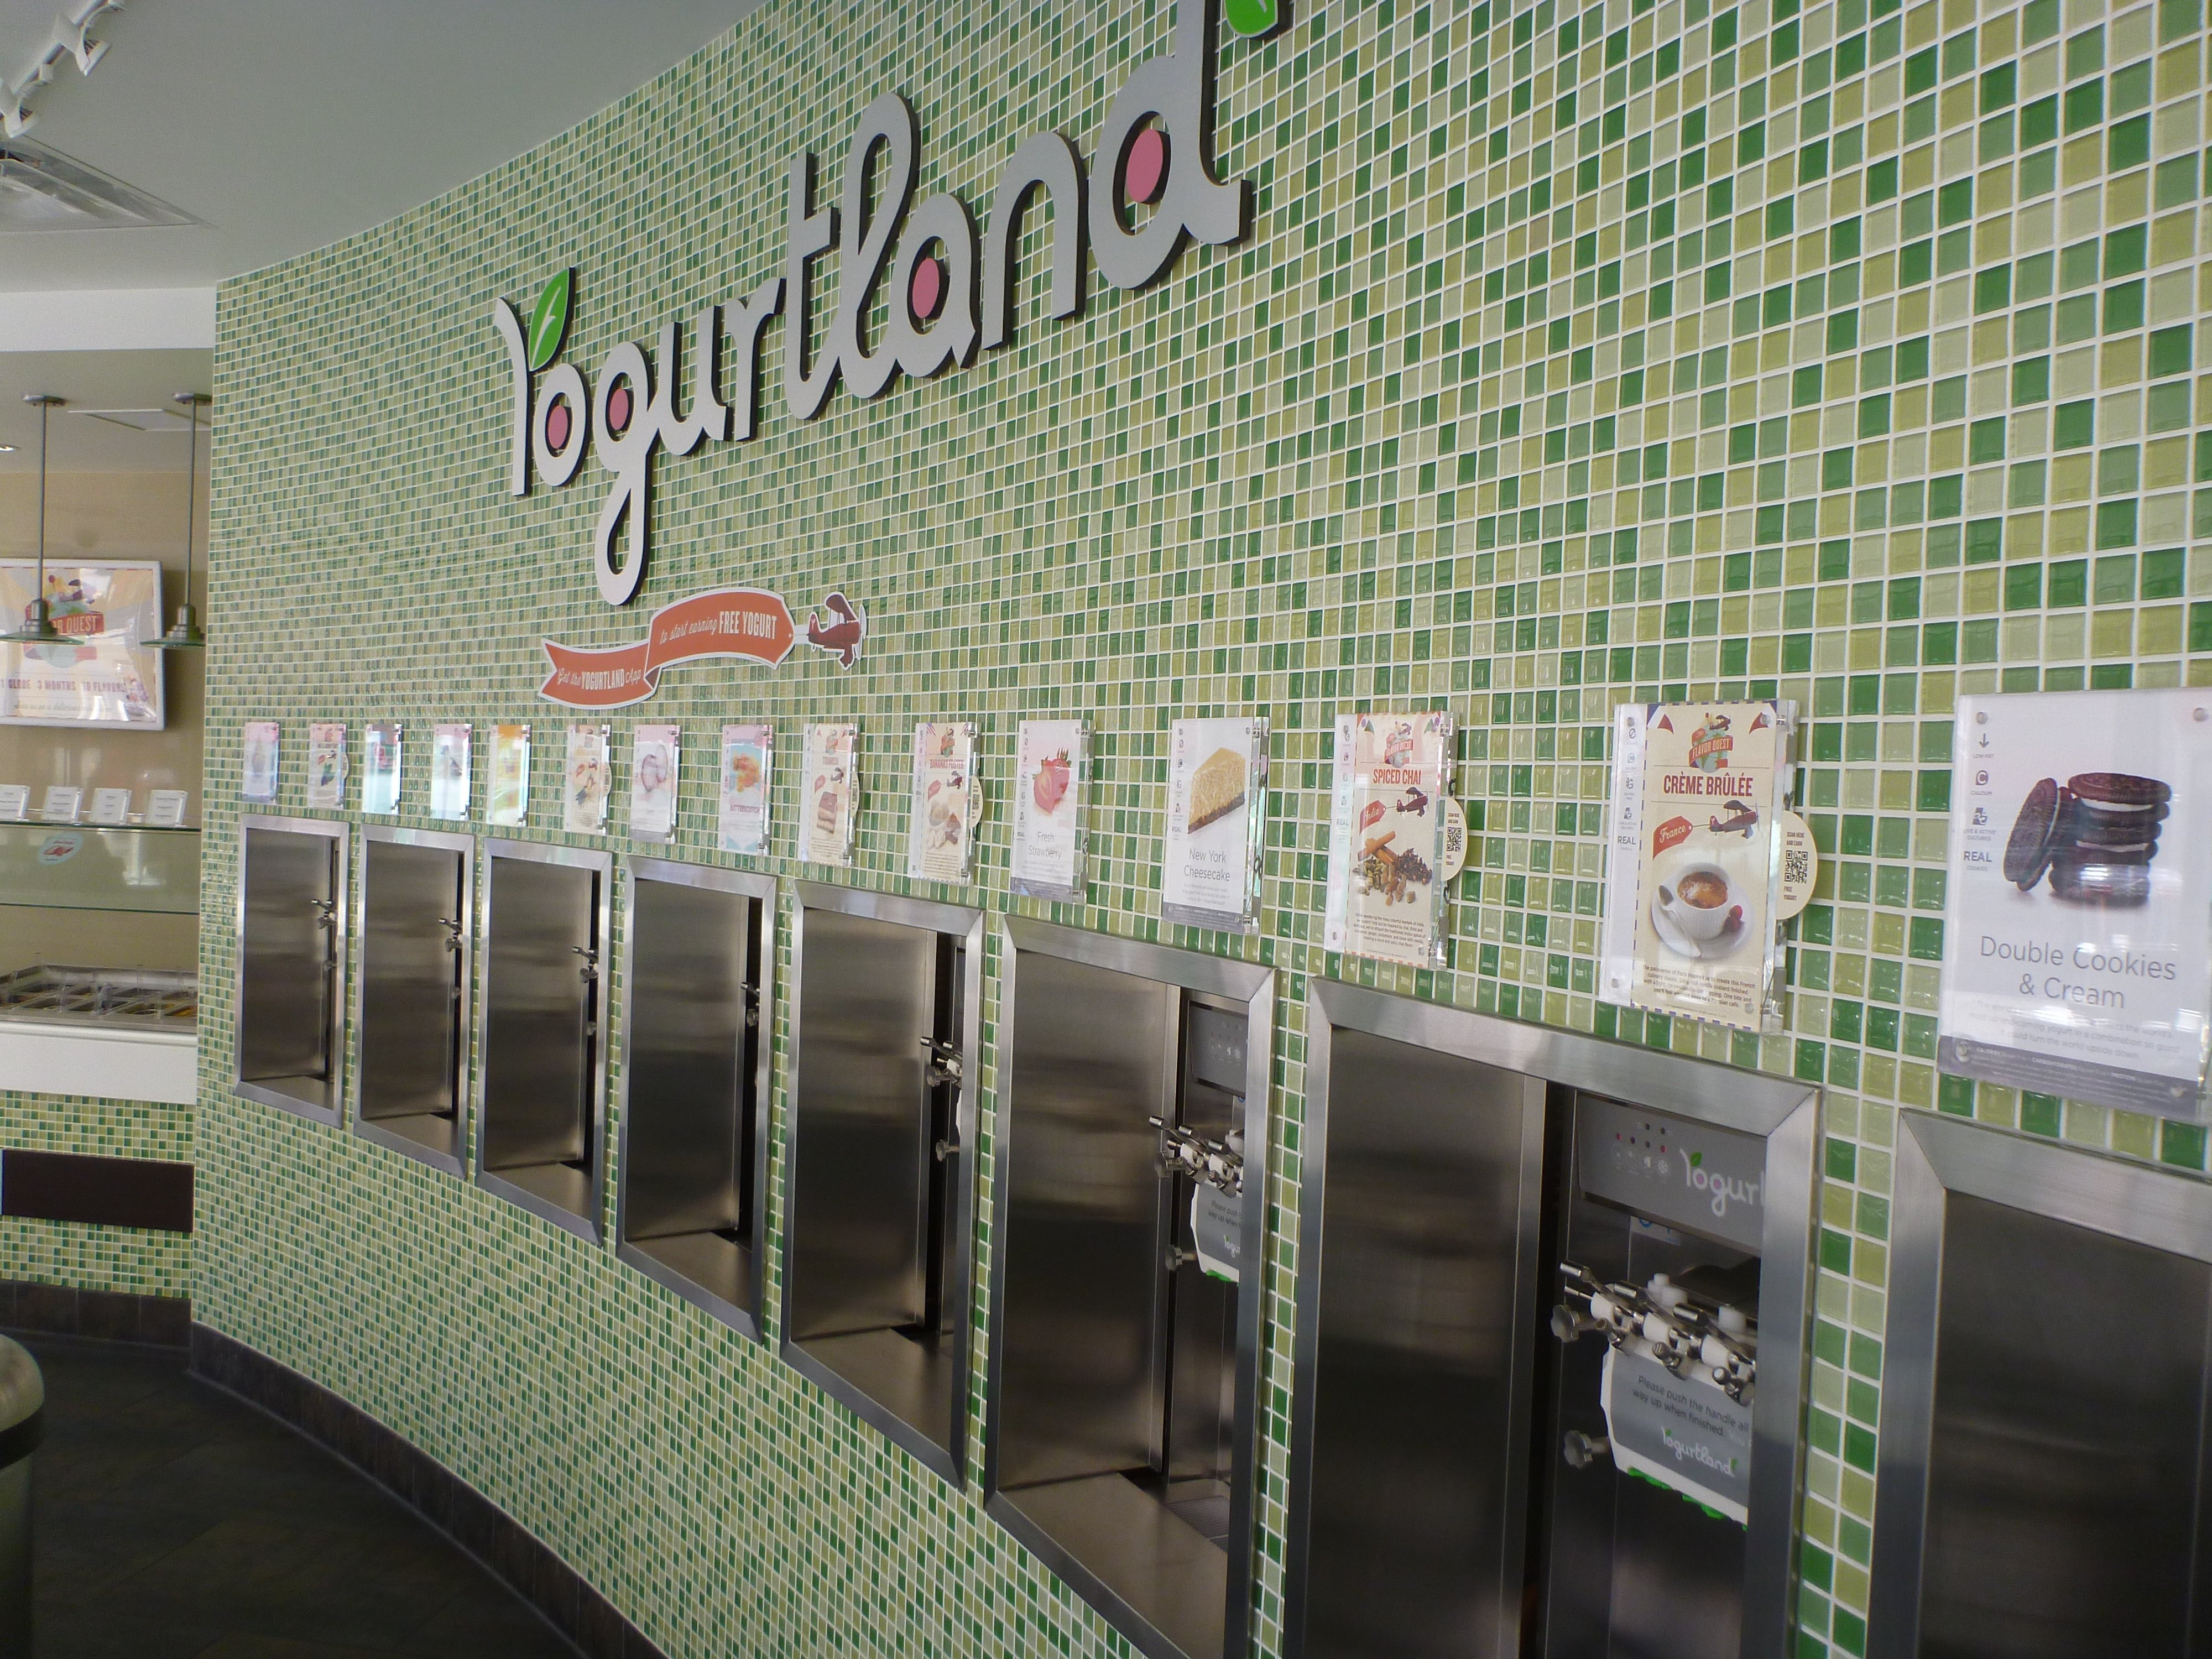 Separating Yogurtland from competitors is the more than 80 different and customized flavors offered at its frozen yogurt shops. Whether traditional or exotic, each flavor uses real ingredients sourced